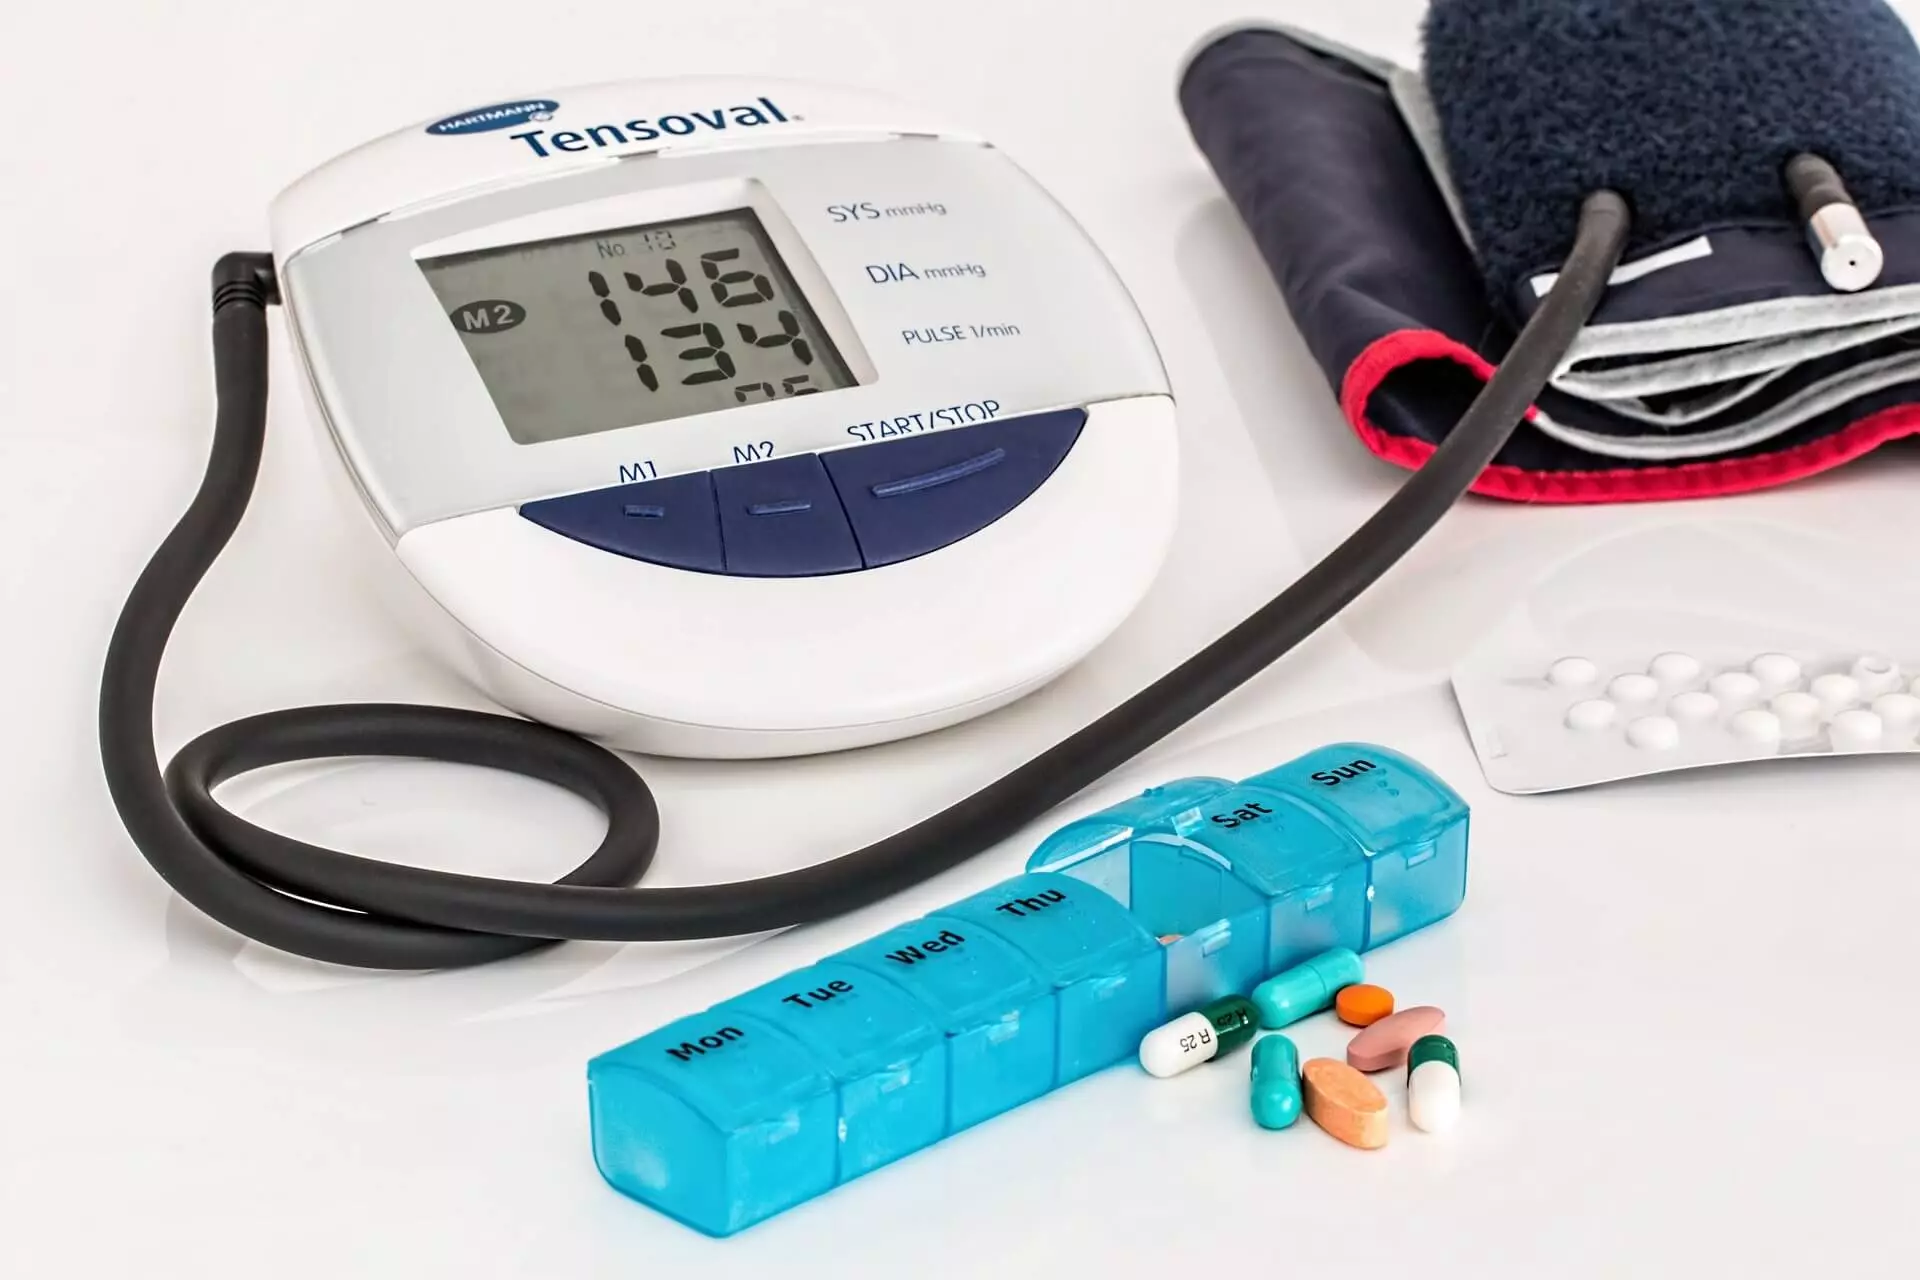 How To Set Up Your Blood Pressure Monitor at Home